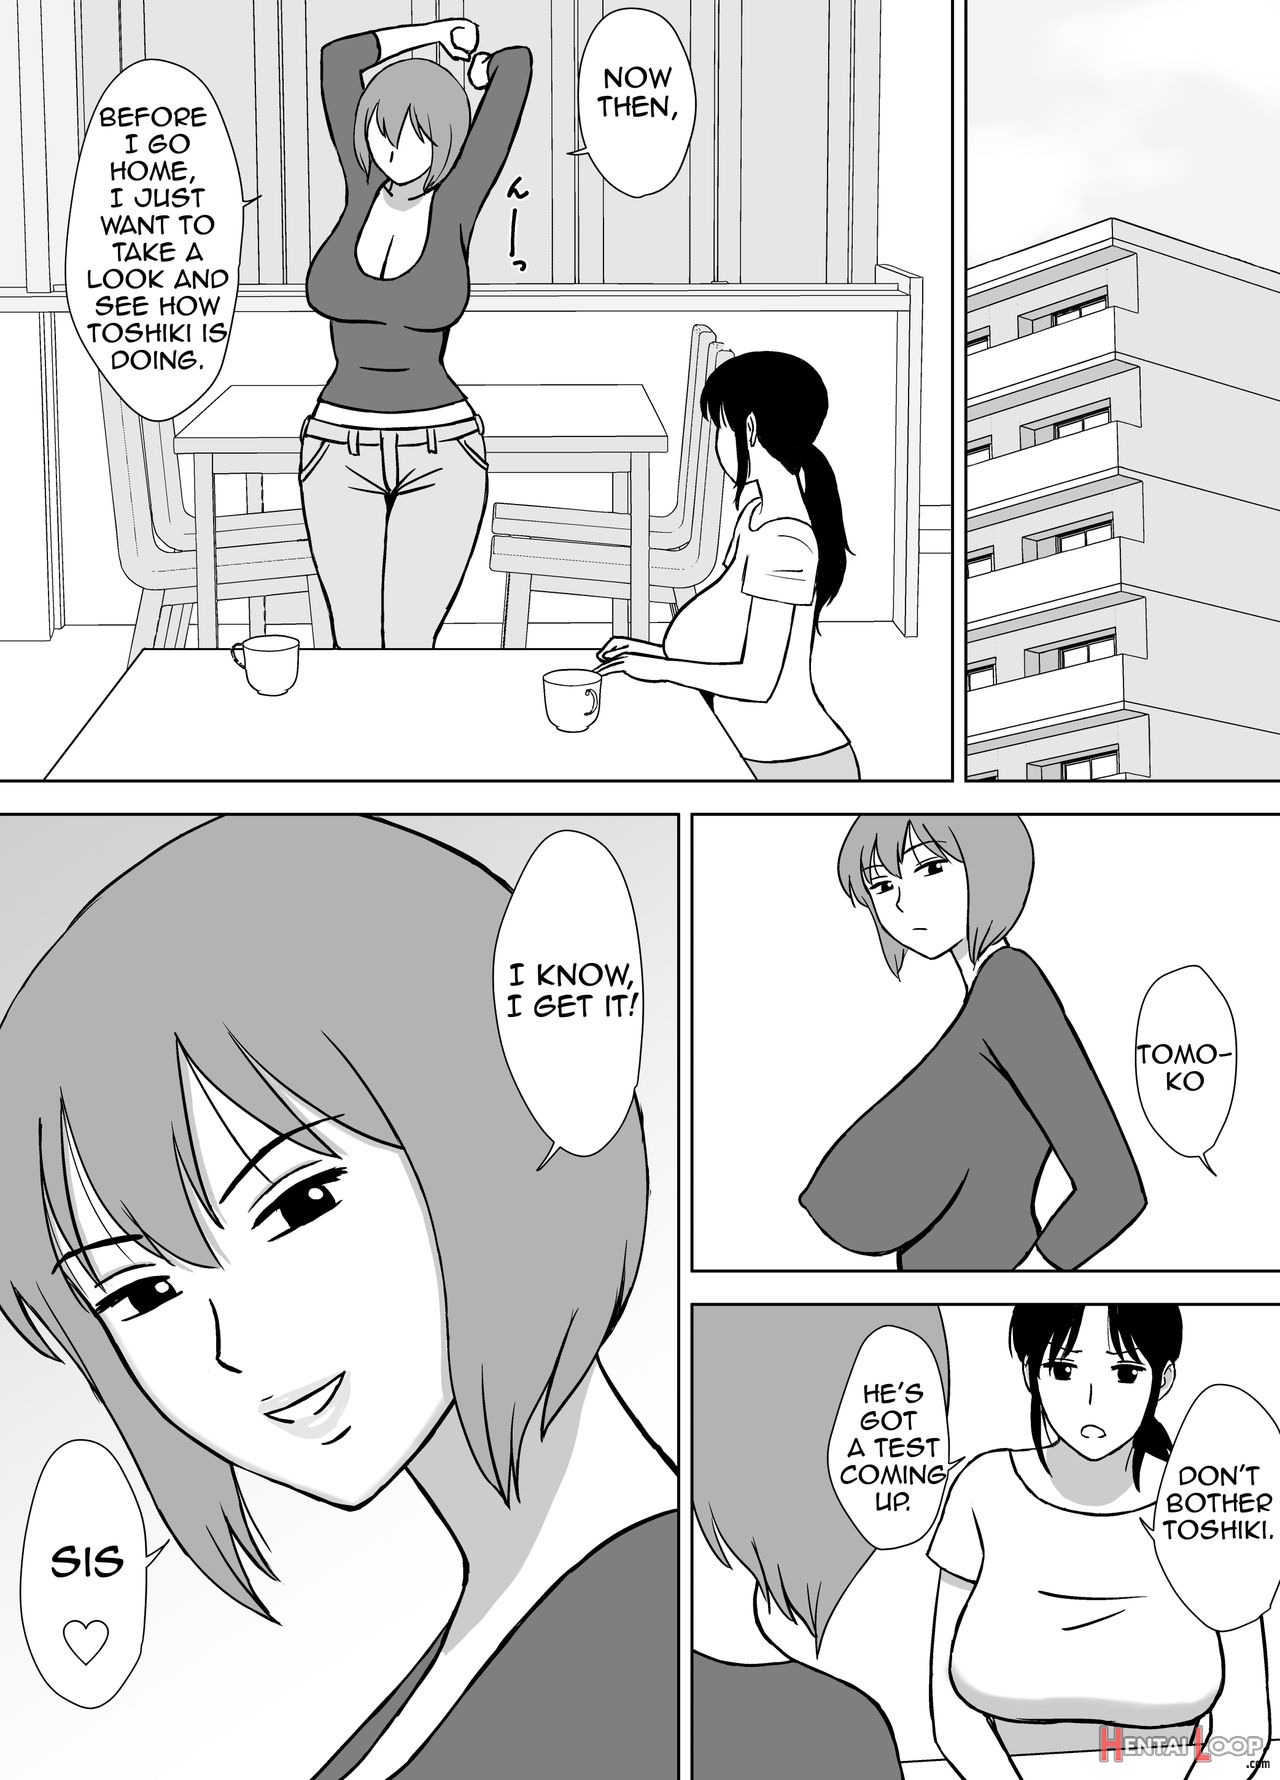 Page 1 of My Mom And My Aunt Are My Sex Friends (by Urakan) - Hentai  doujinshi for free at HentaiLoop